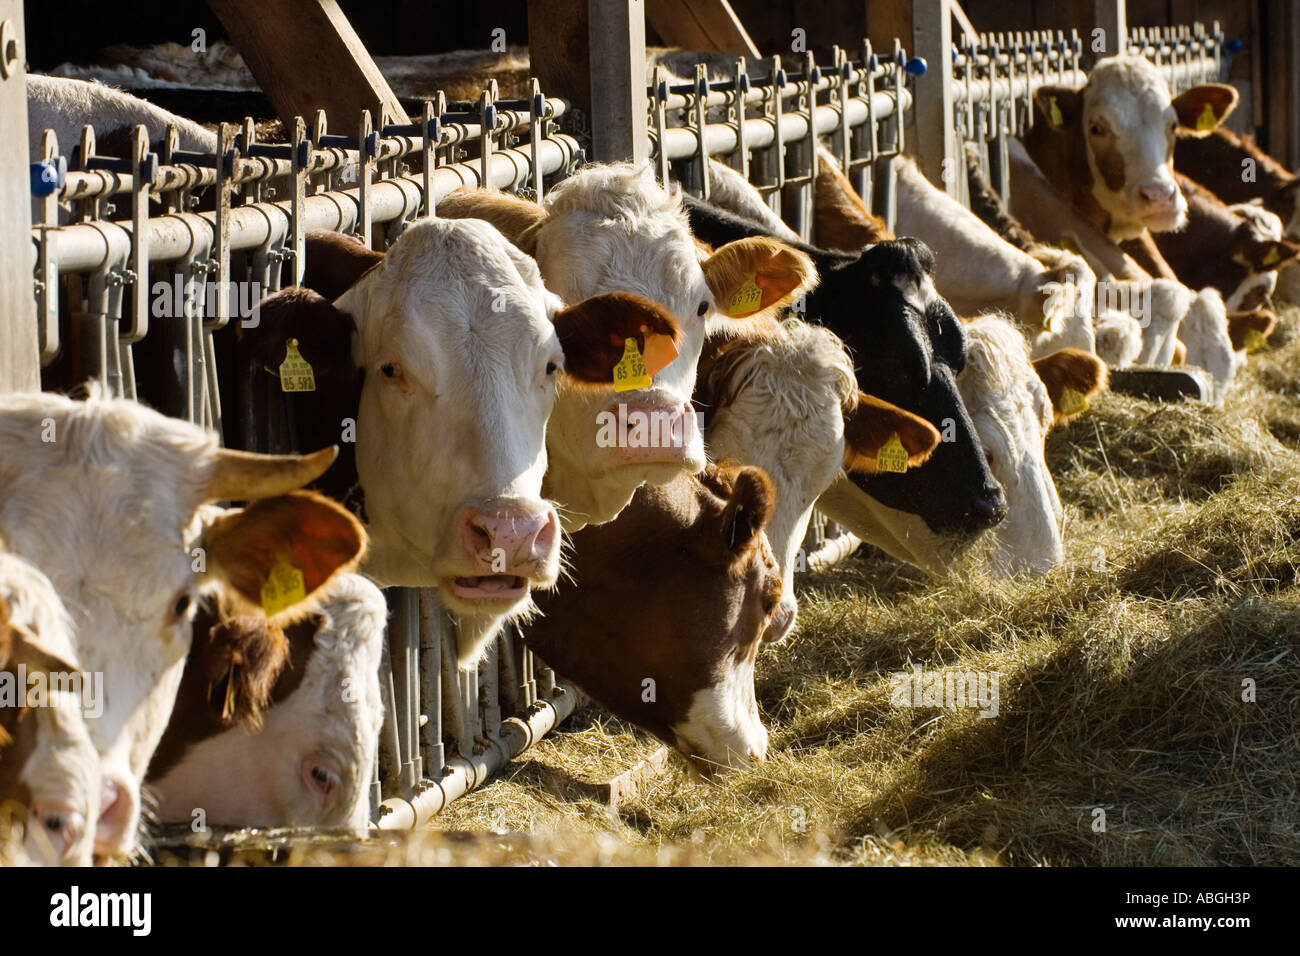 Cows in stable, Upper Bavaria, Germany Stock Photo